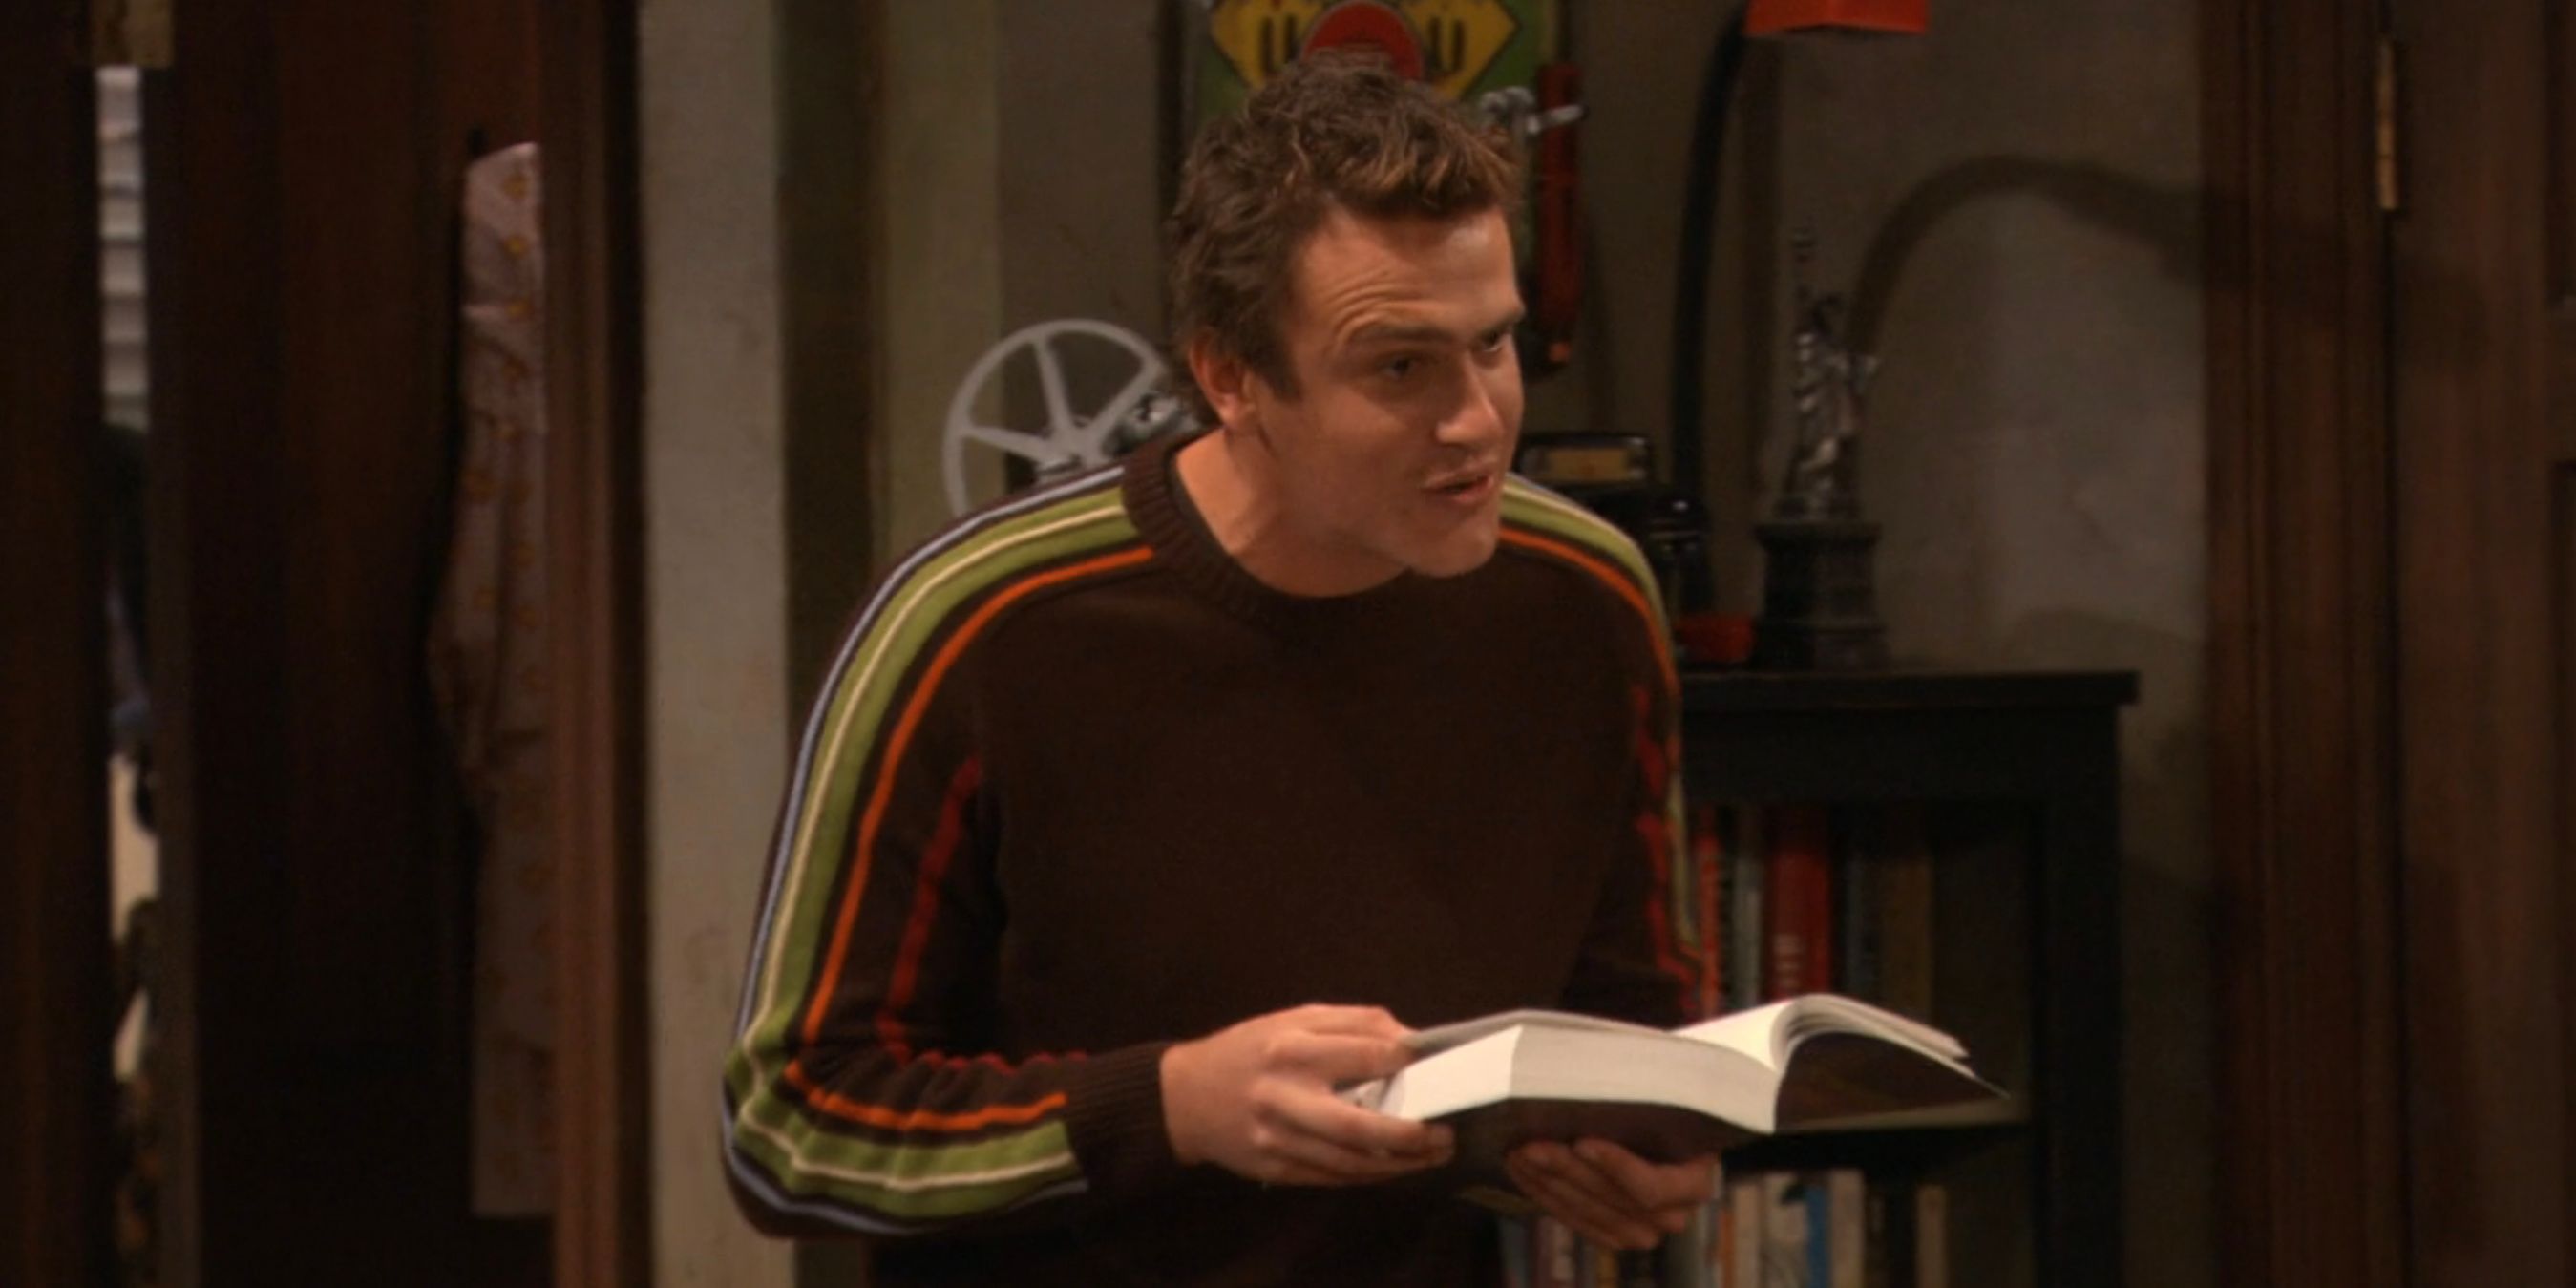 Marshall Eriksen reading a book in How I Met Your Mother.